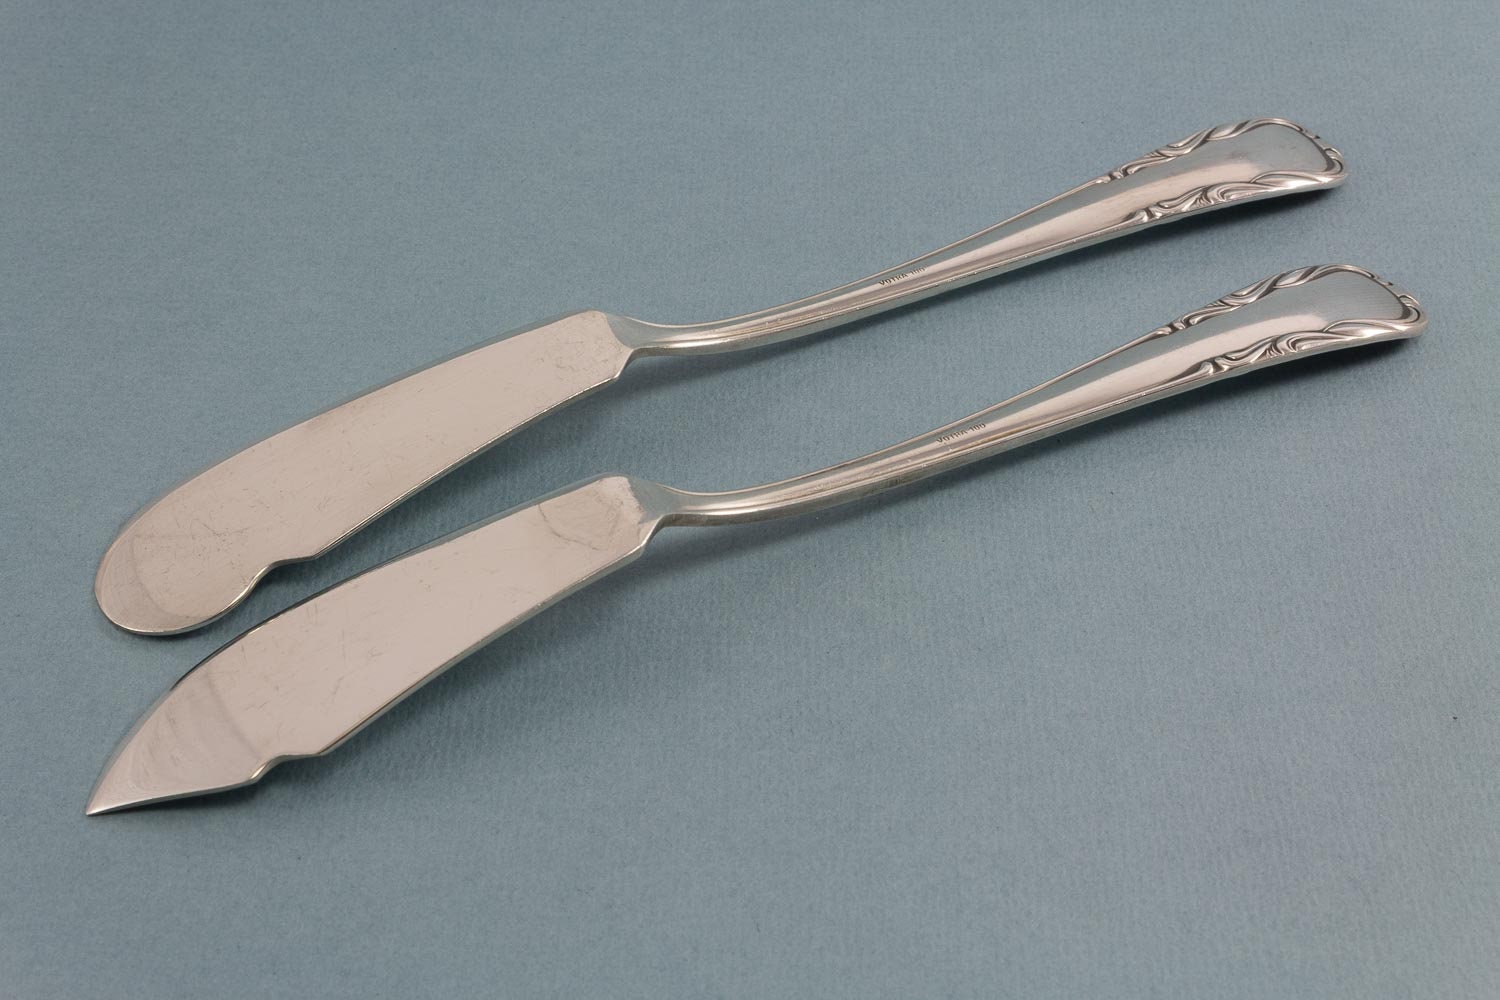 Cheese knife and butter knife, silver plated knives